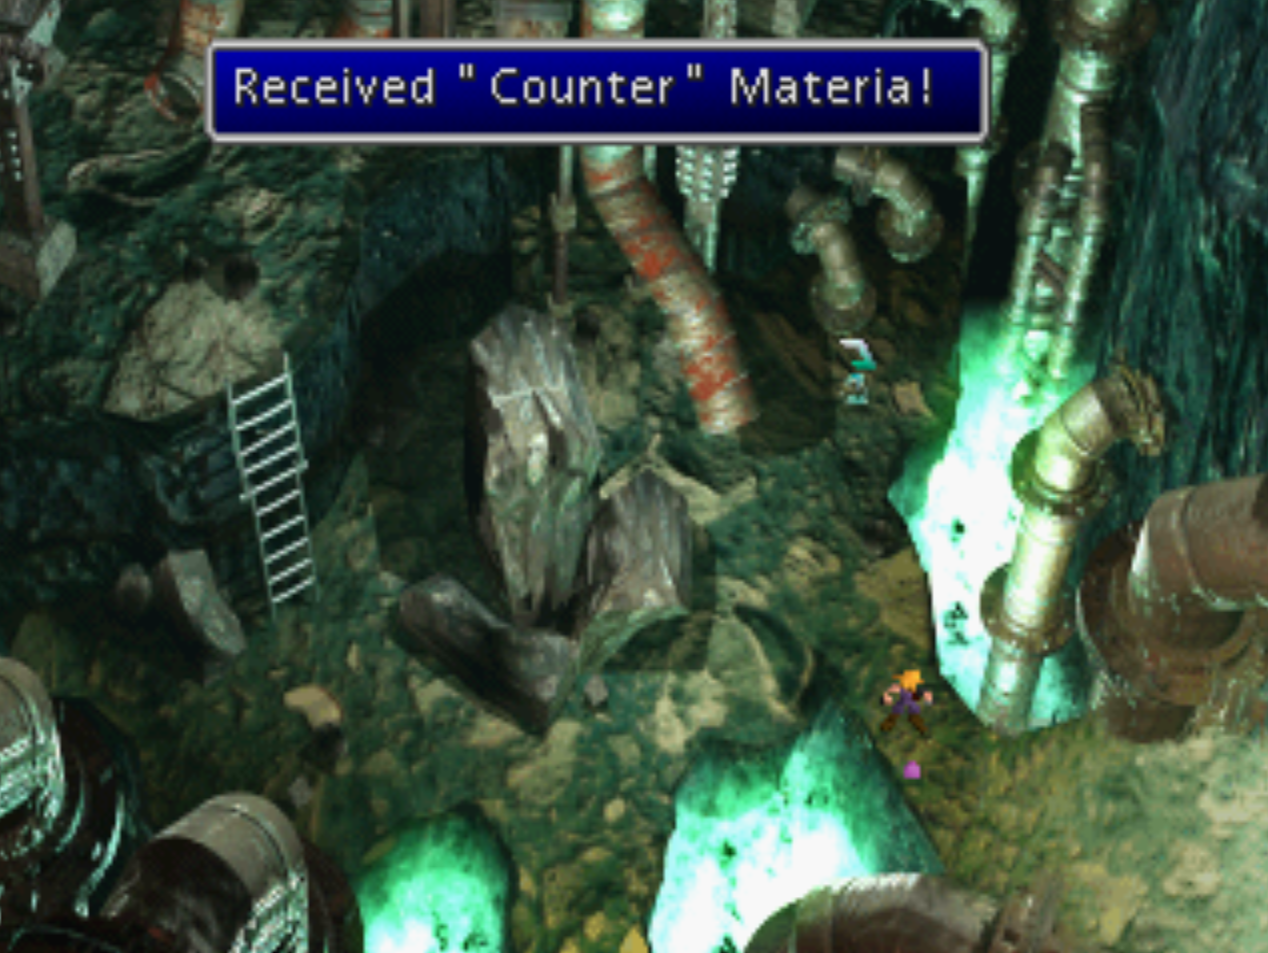 Counter Materia Received